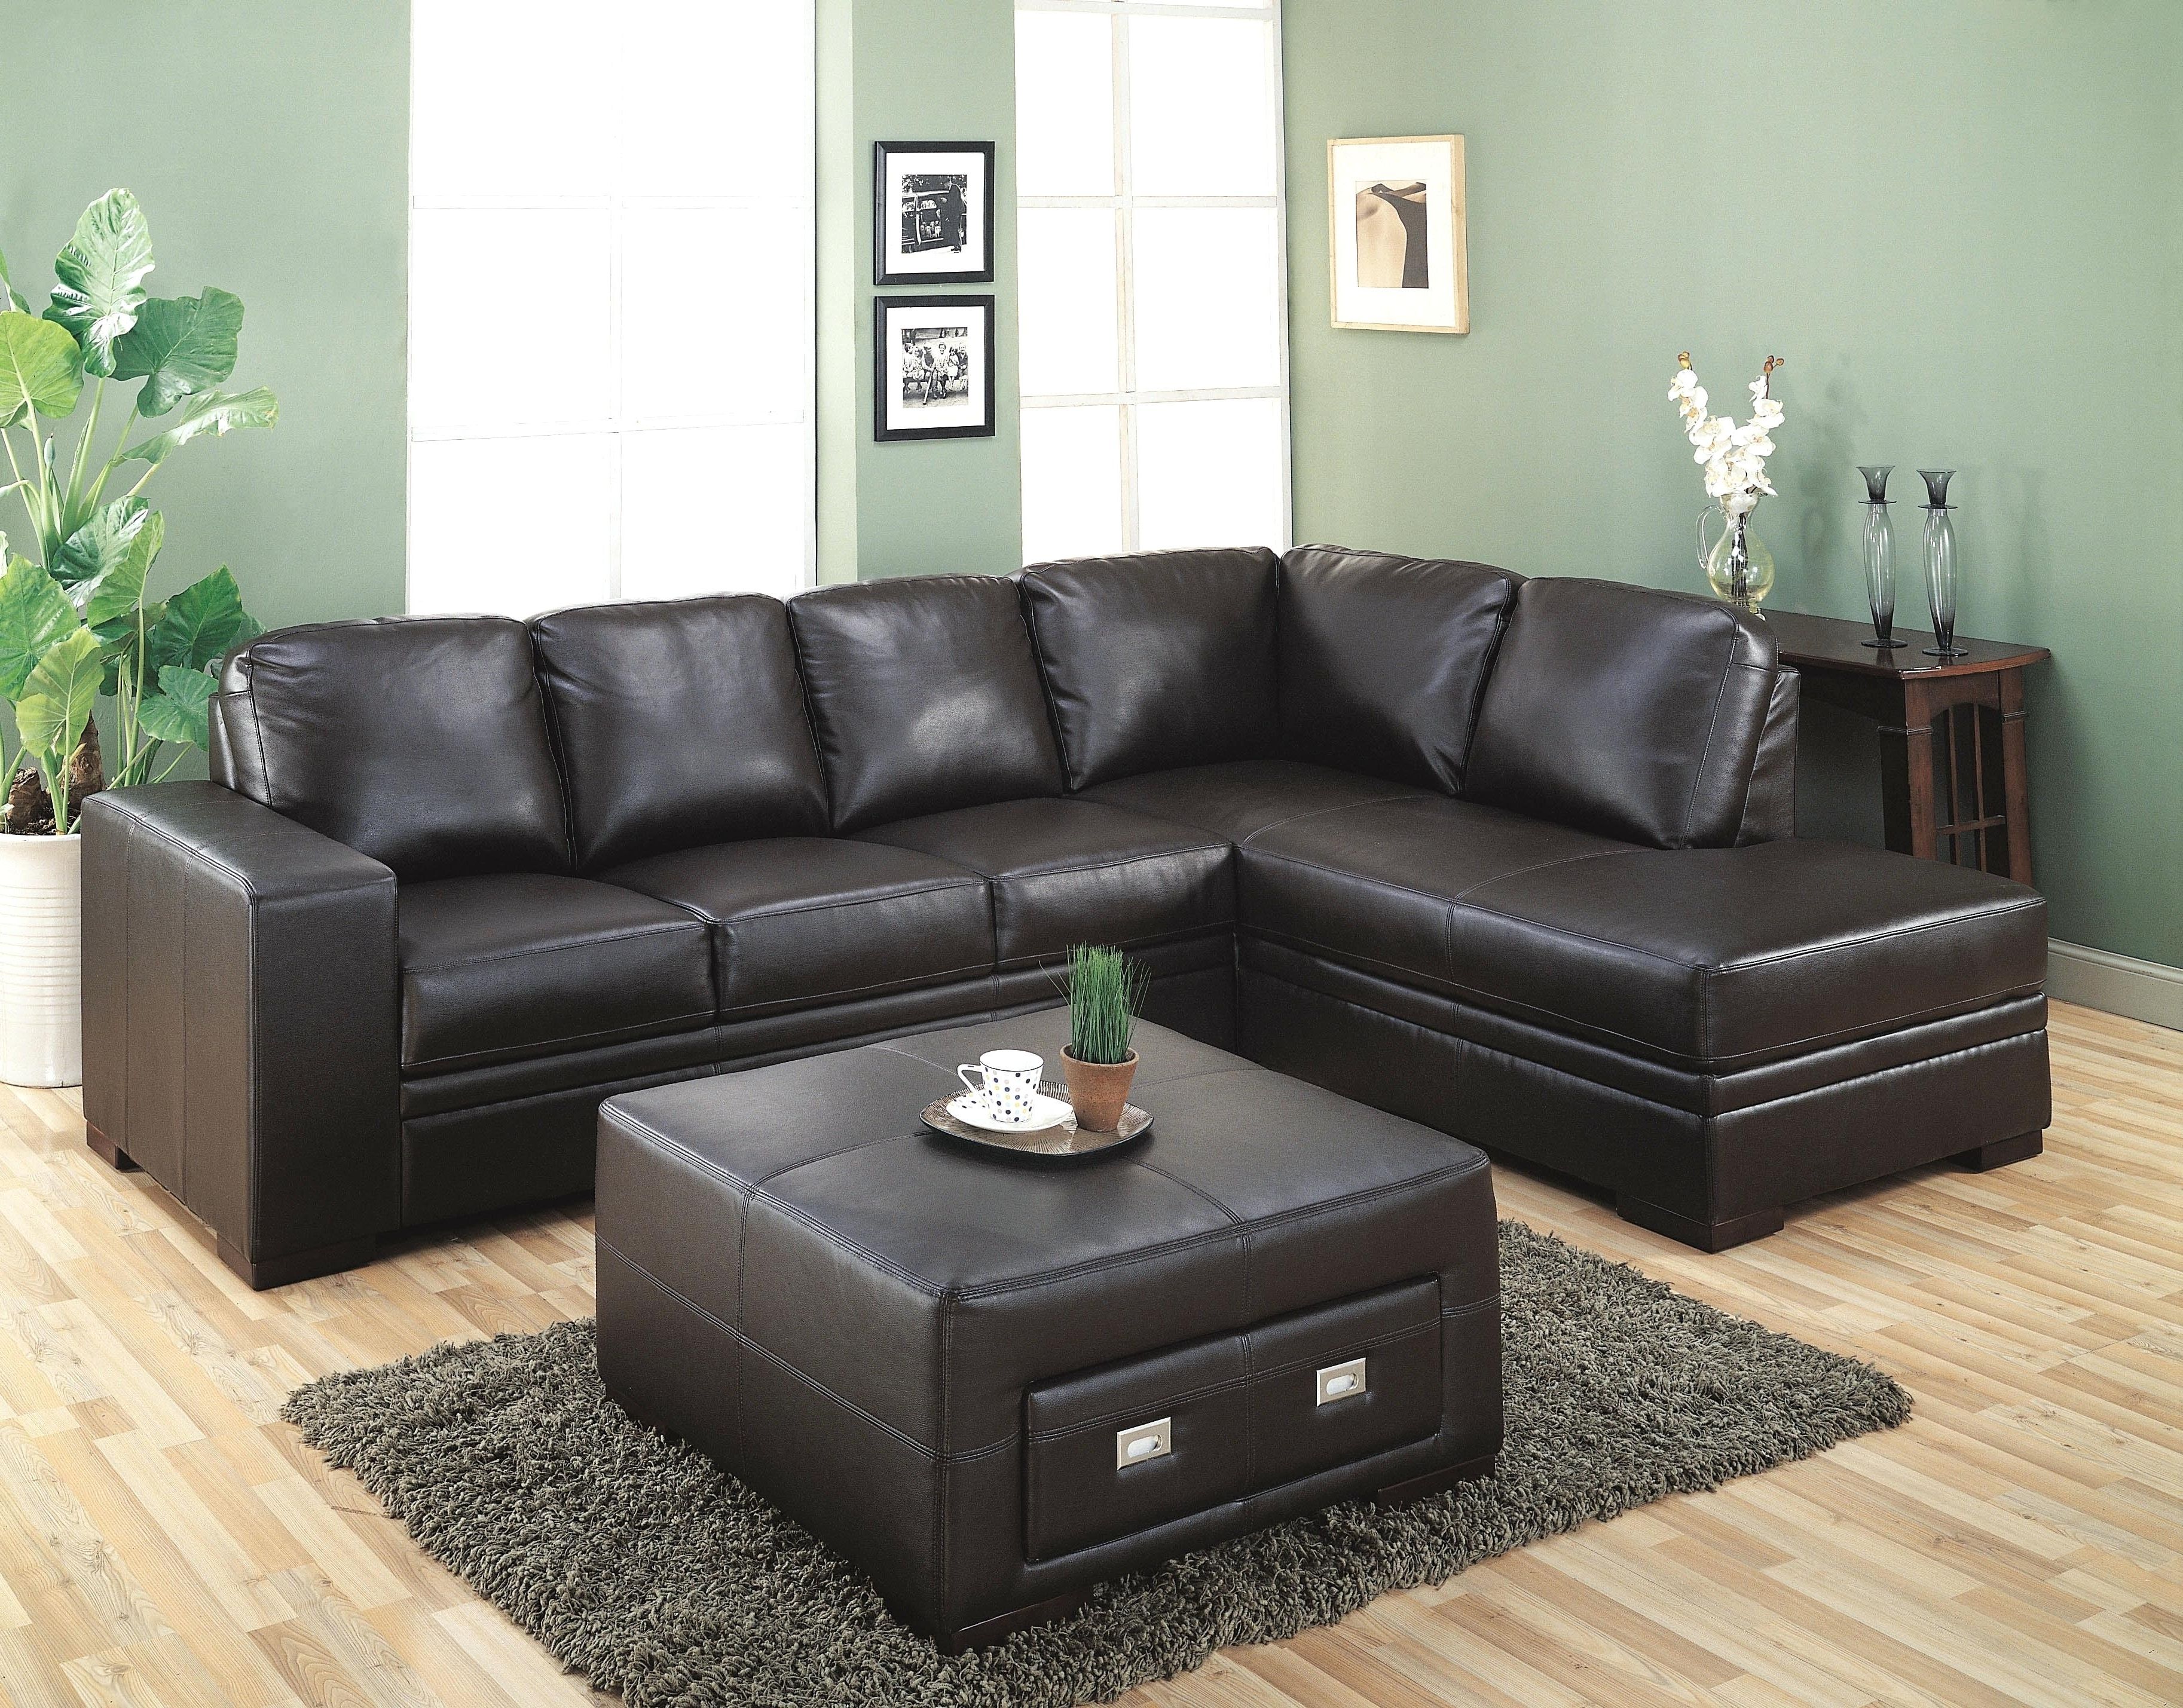 Berkline Sectional Sofas For Most Current Berkline Sectional Sofa Reviews Leather Sofas – Poikilothermia (Photo 10 of 15)